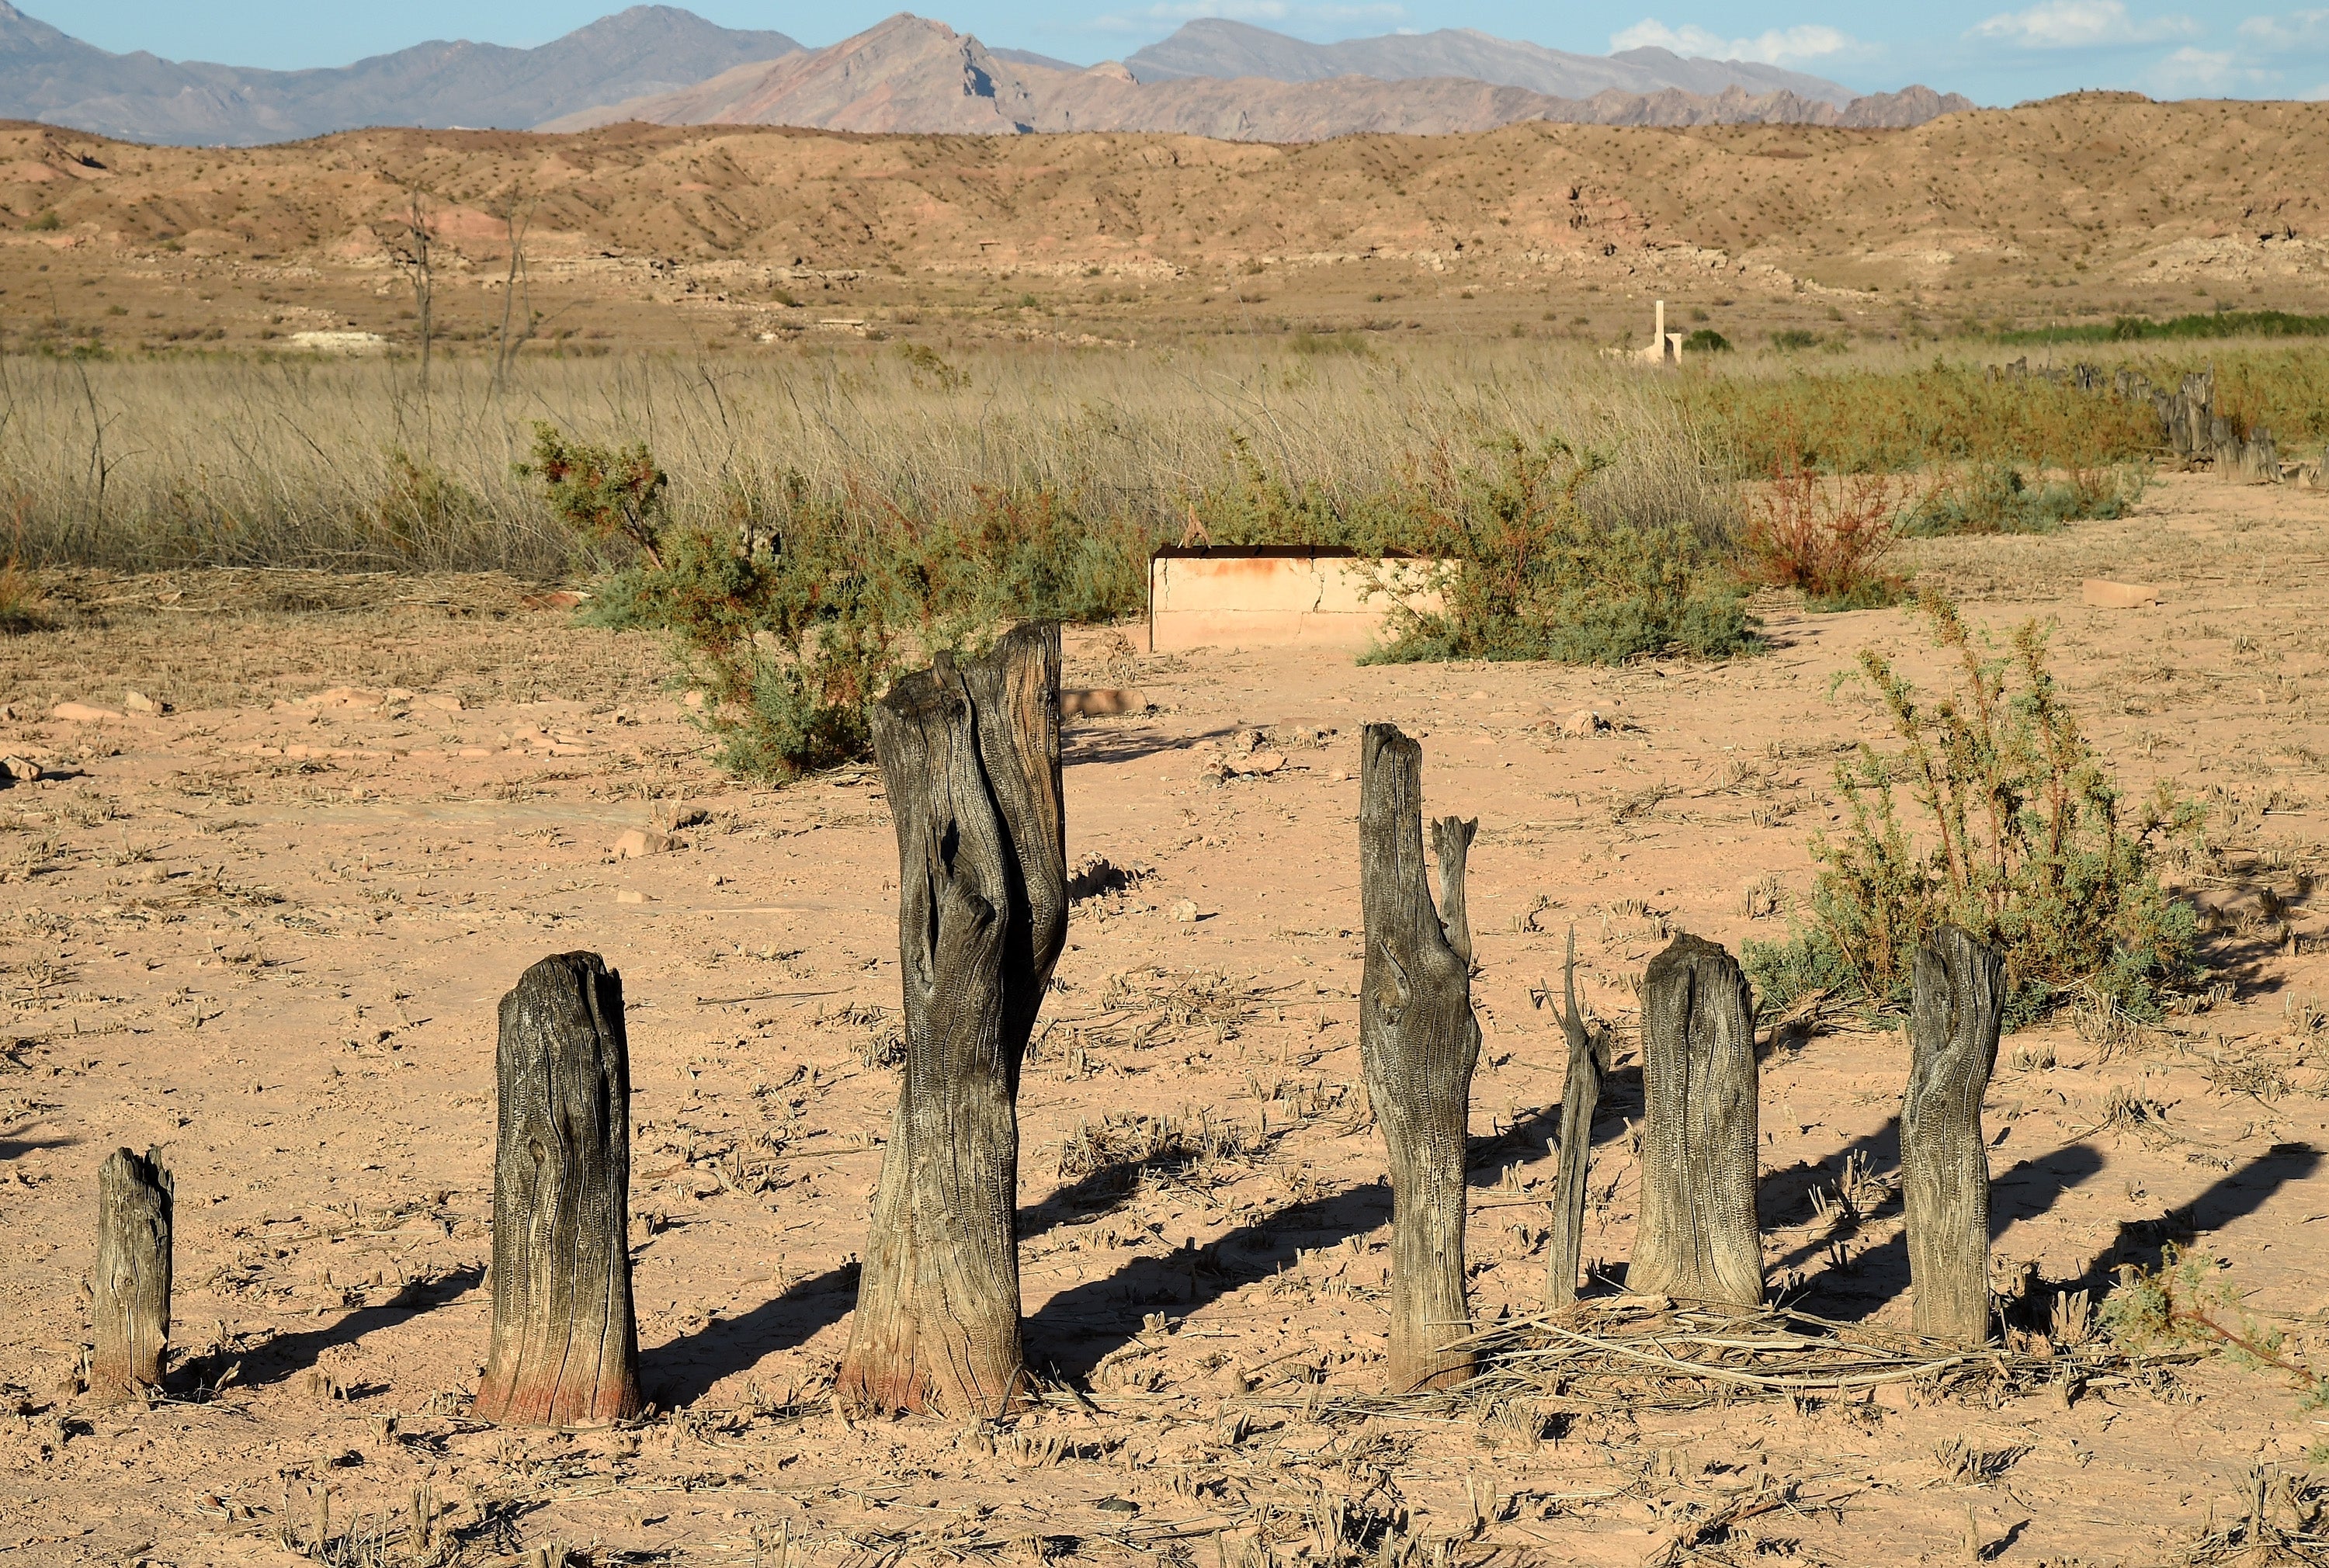 The once flooded ghost town of St Thomas in Lake Mead, Nevada, pictured uncovered in 2015, after epic droughts caused water levels to drop. The on-going crisis could cause water shut offs